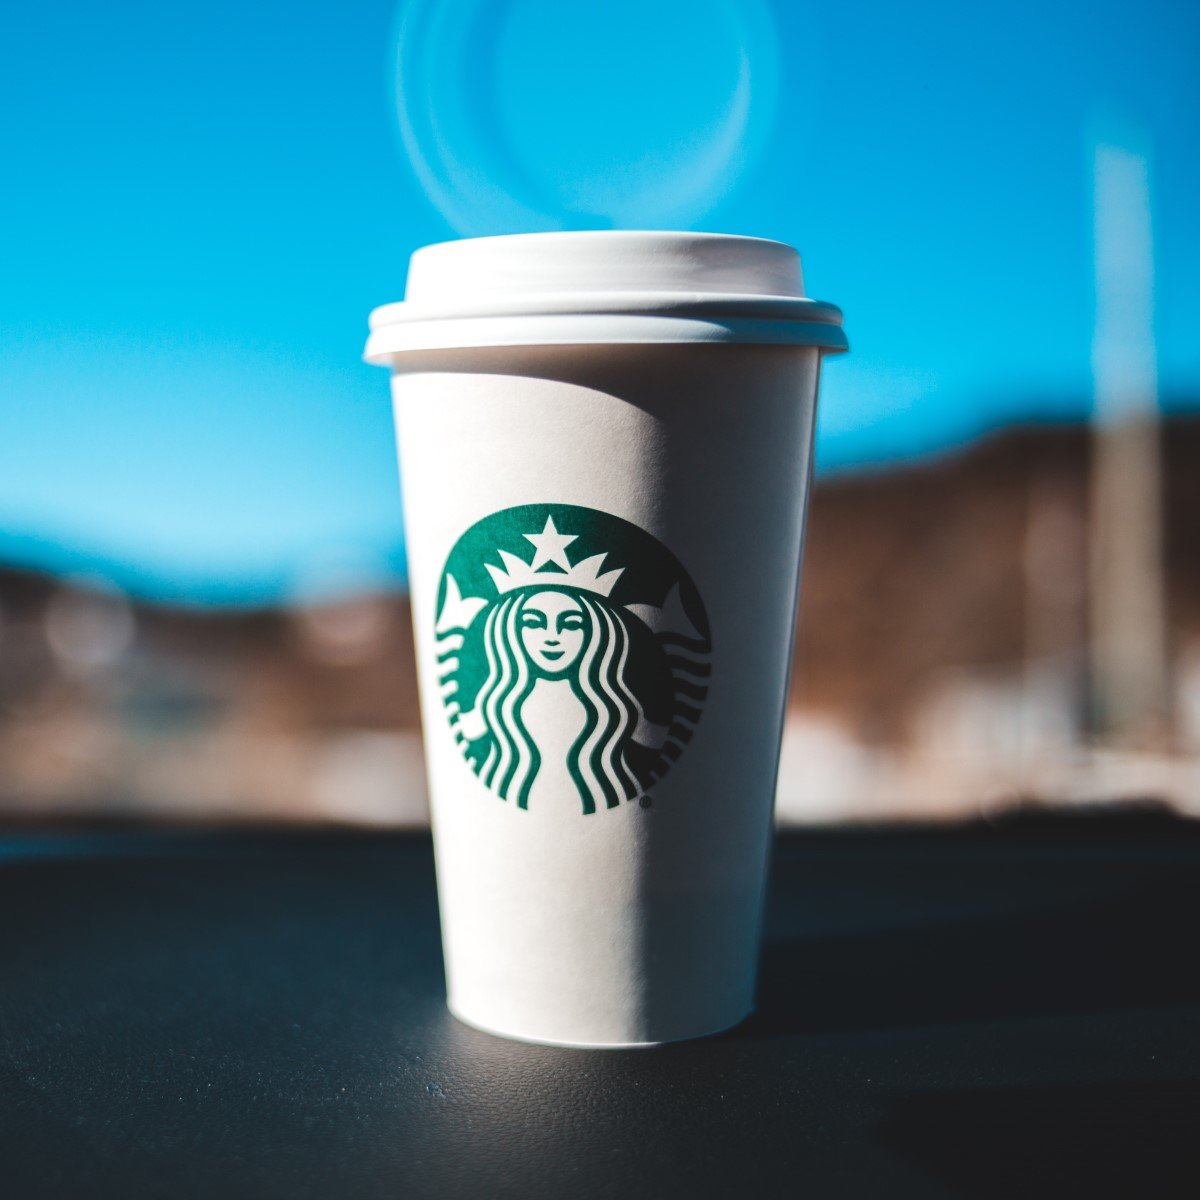 starbucks disposable cup on windowsill showing reflection